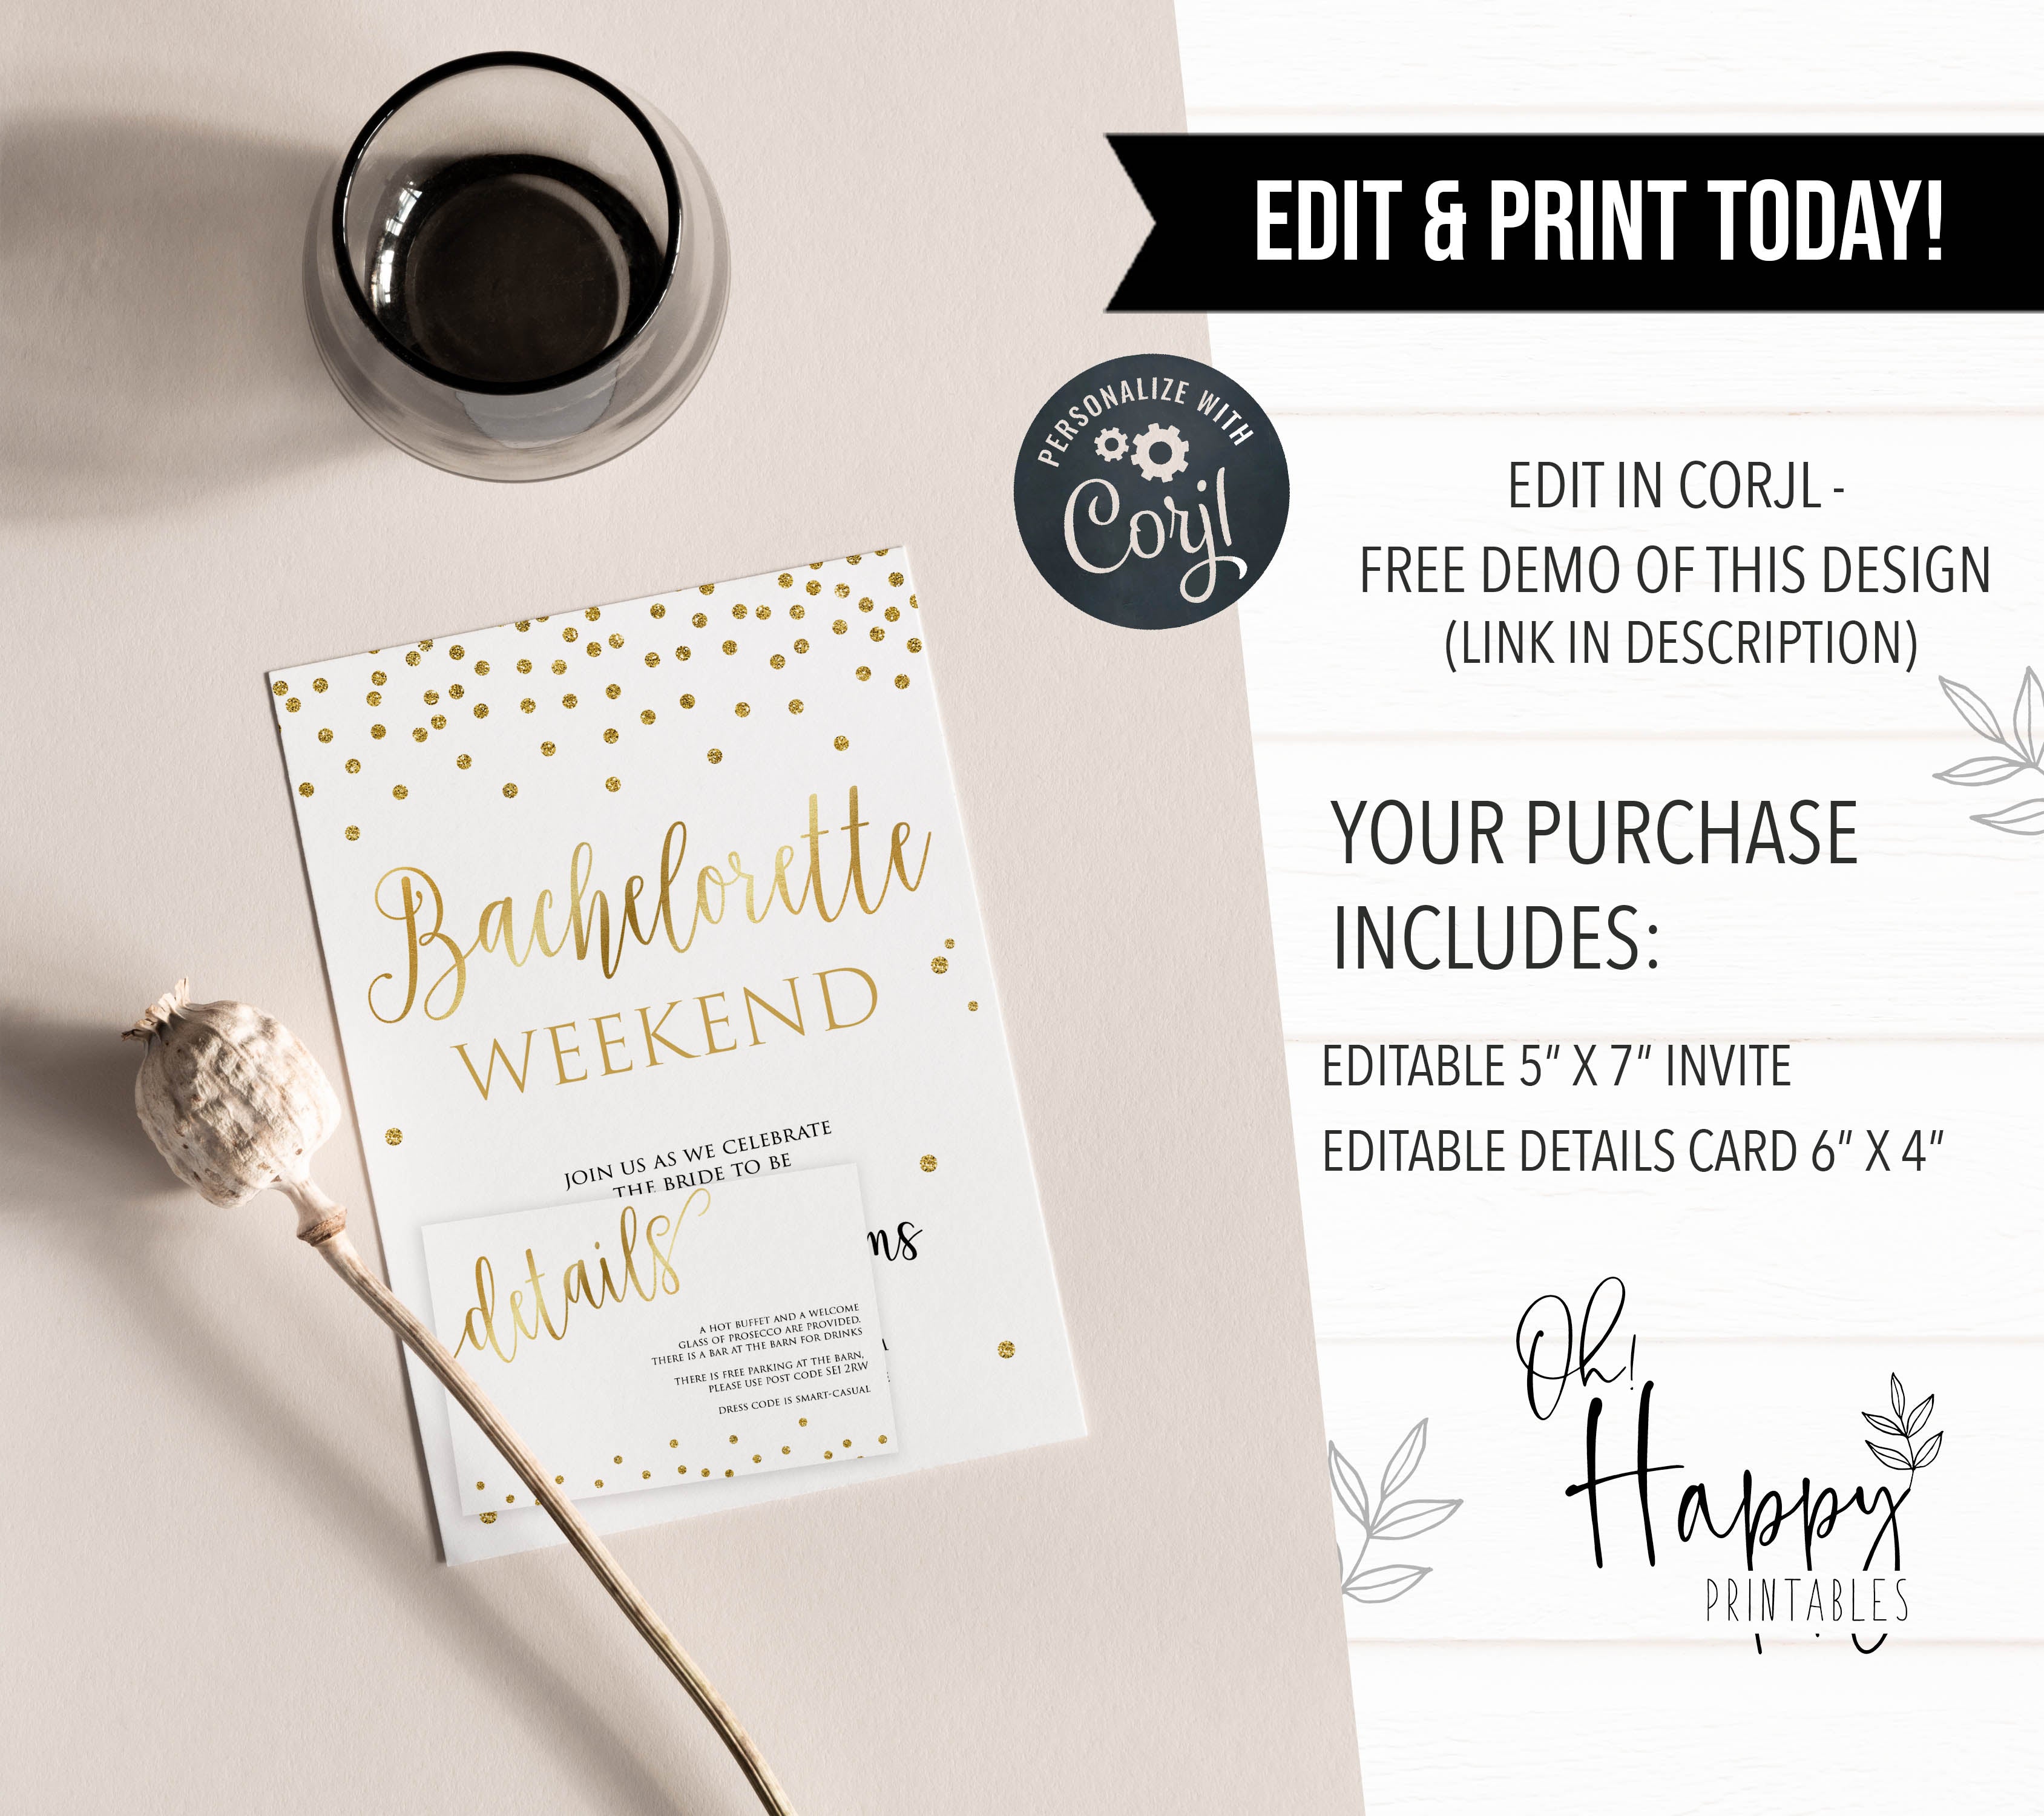 Pin on Bachelorette Party Invitations, Supplies